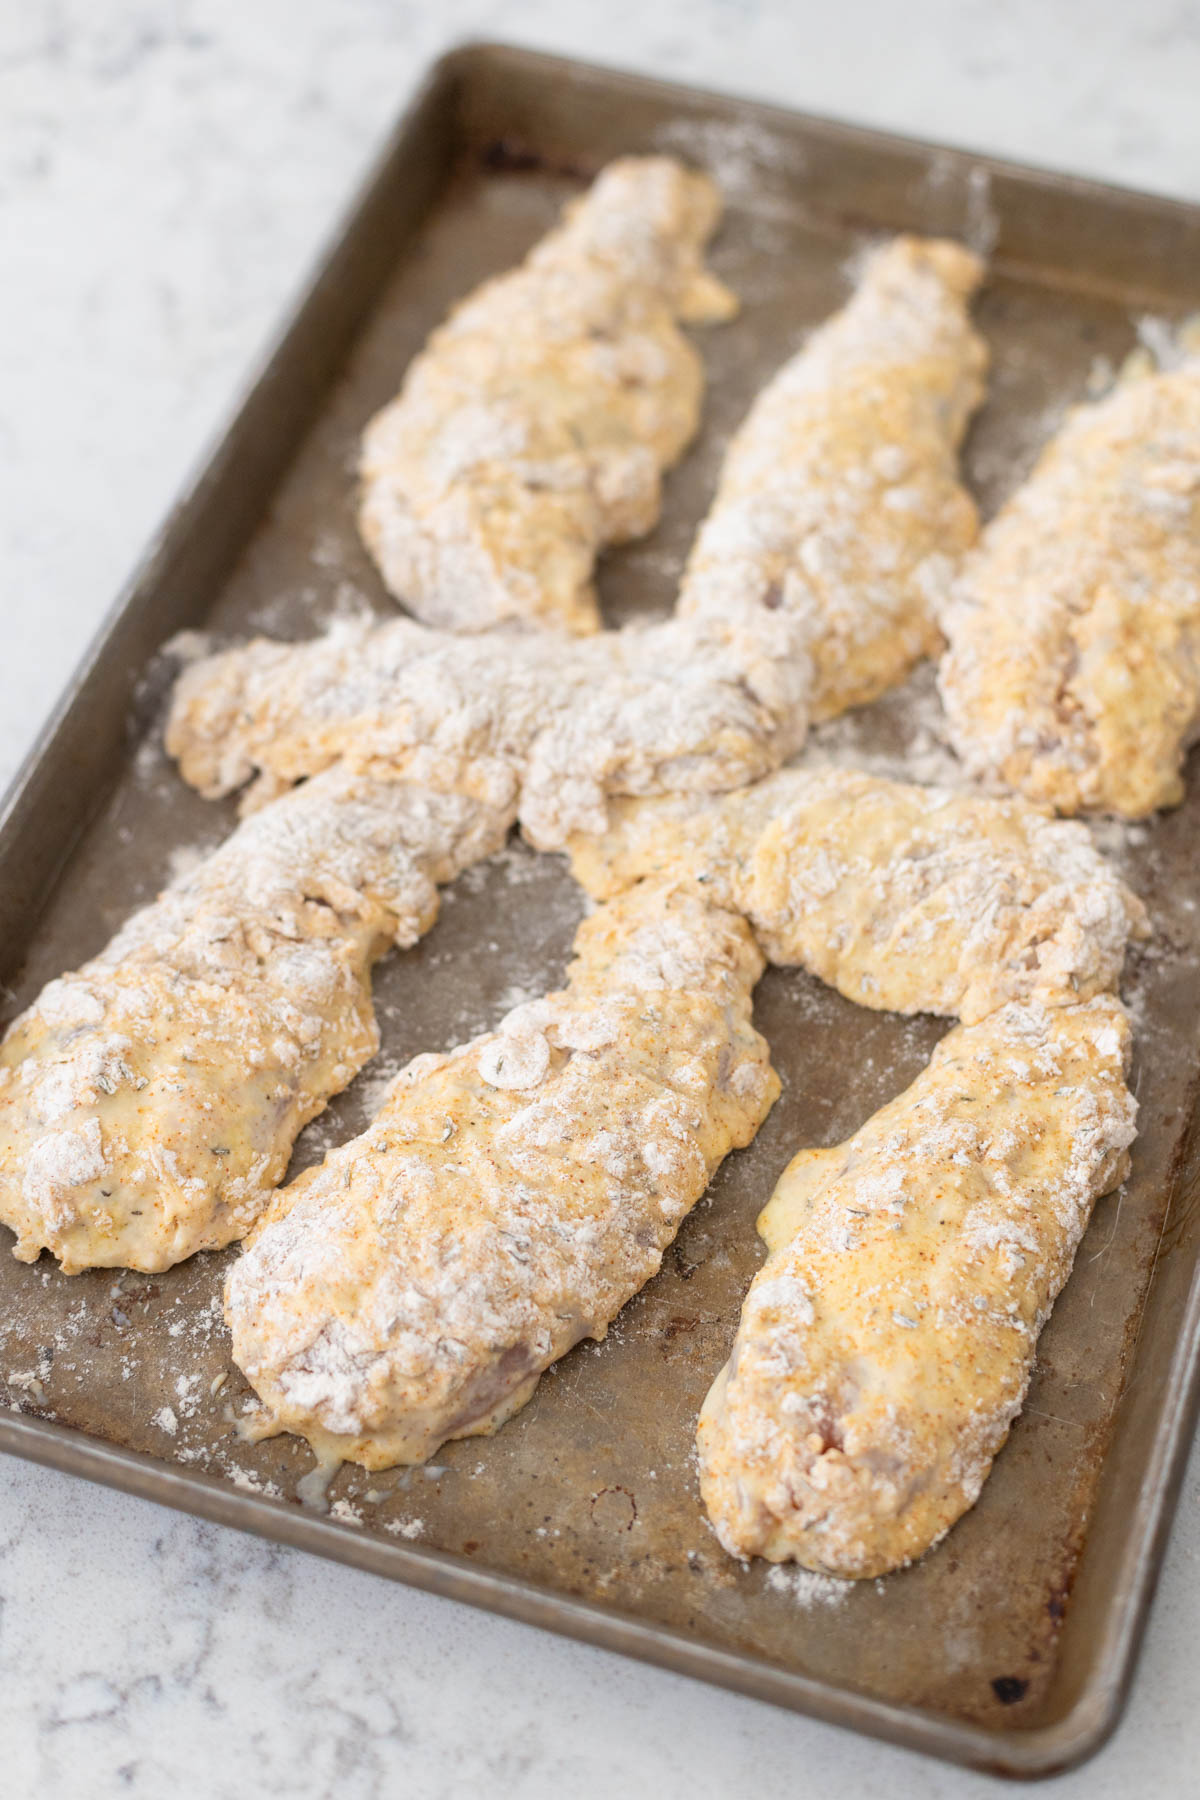 The chicken tenders have been breaded and are lined up on a baking pan.